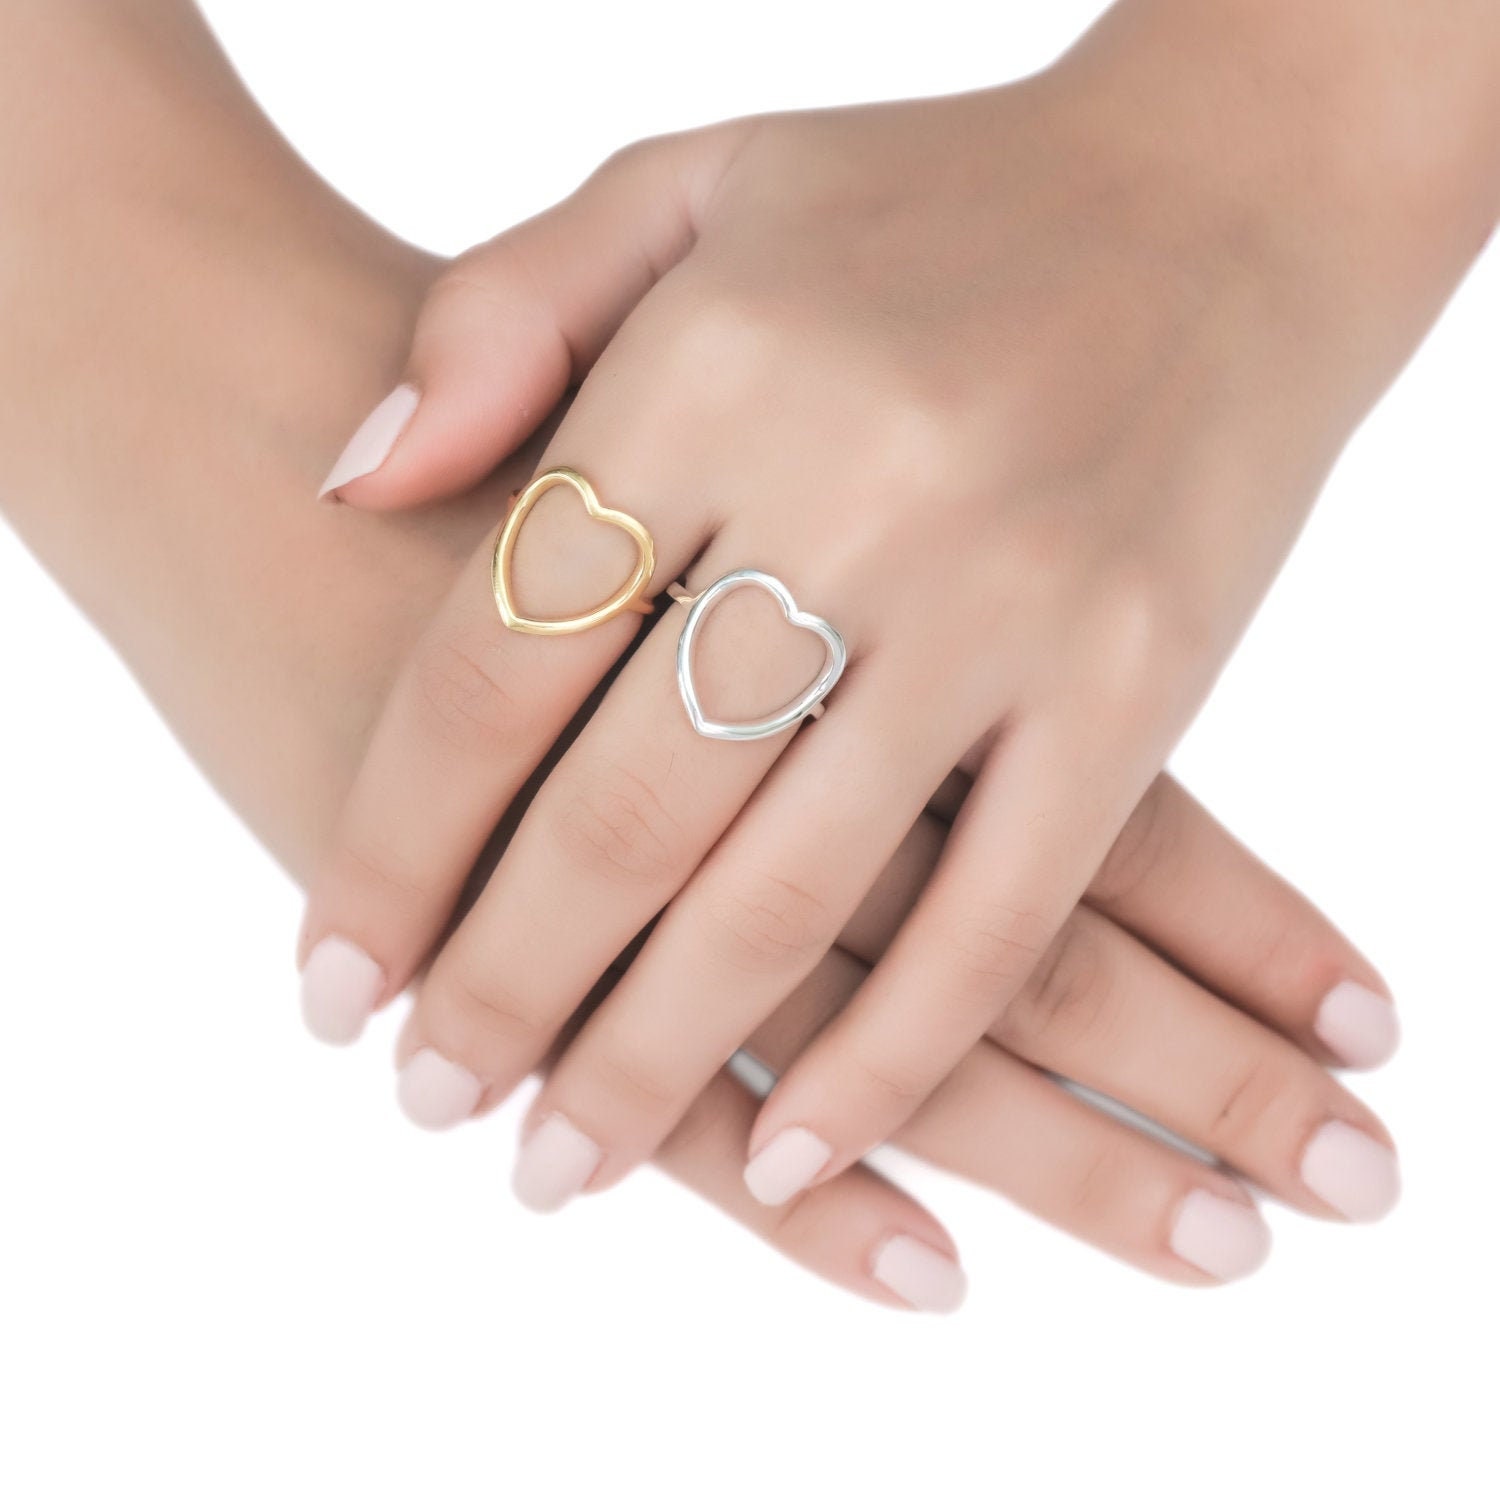 14K Yellow Gold Vermeil Heart Shape Ring, Stackable Rings, 18K Stacking Ring Free Engraving, Gift